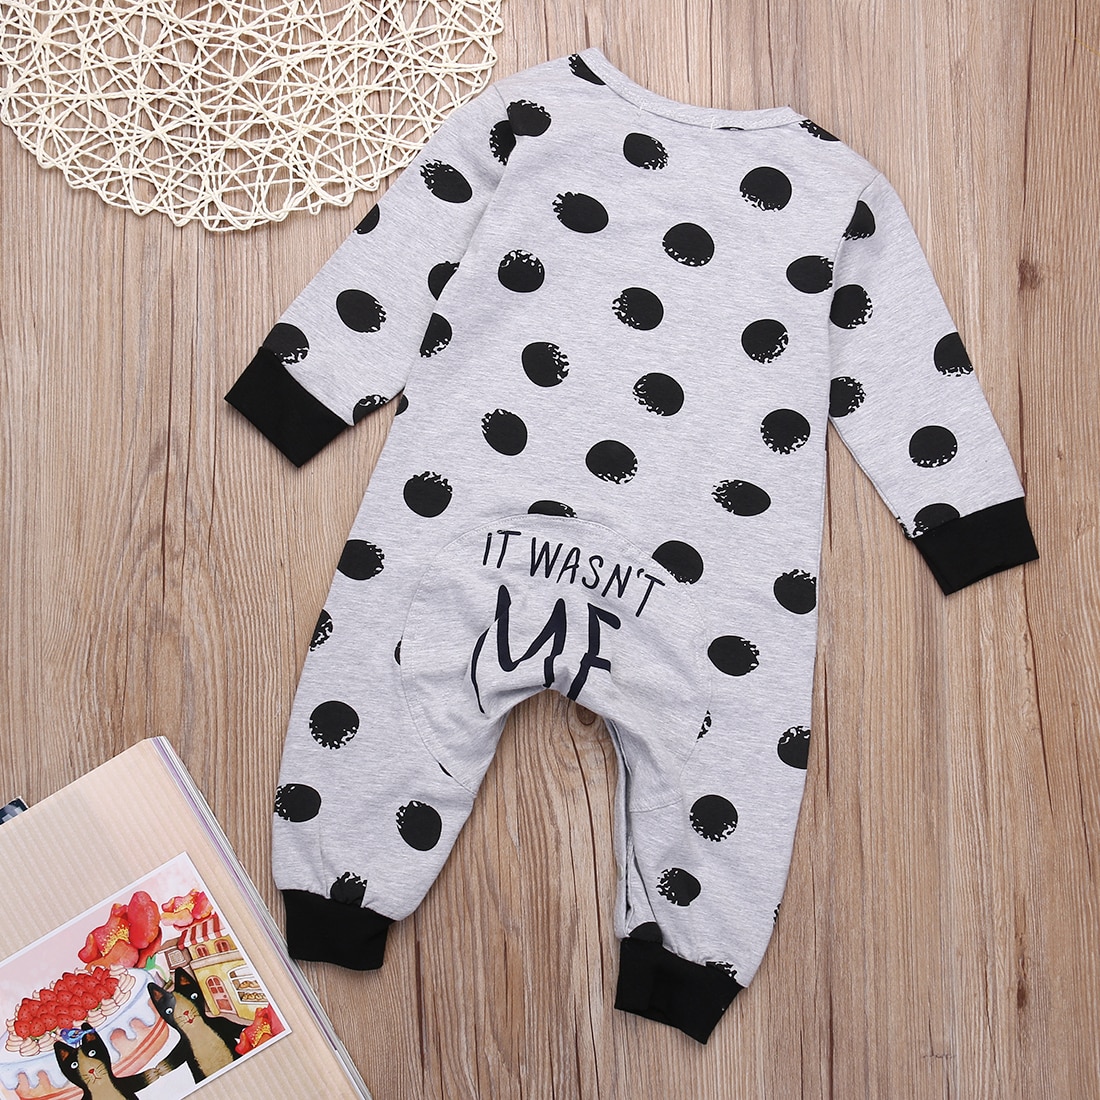 Newborn-Baby-Girl-Rompers-Jumpsuit-Long-Sleeve-Polka-Dot-Lovely-Cute-Fashion-Clothes-Outfit-0-24M